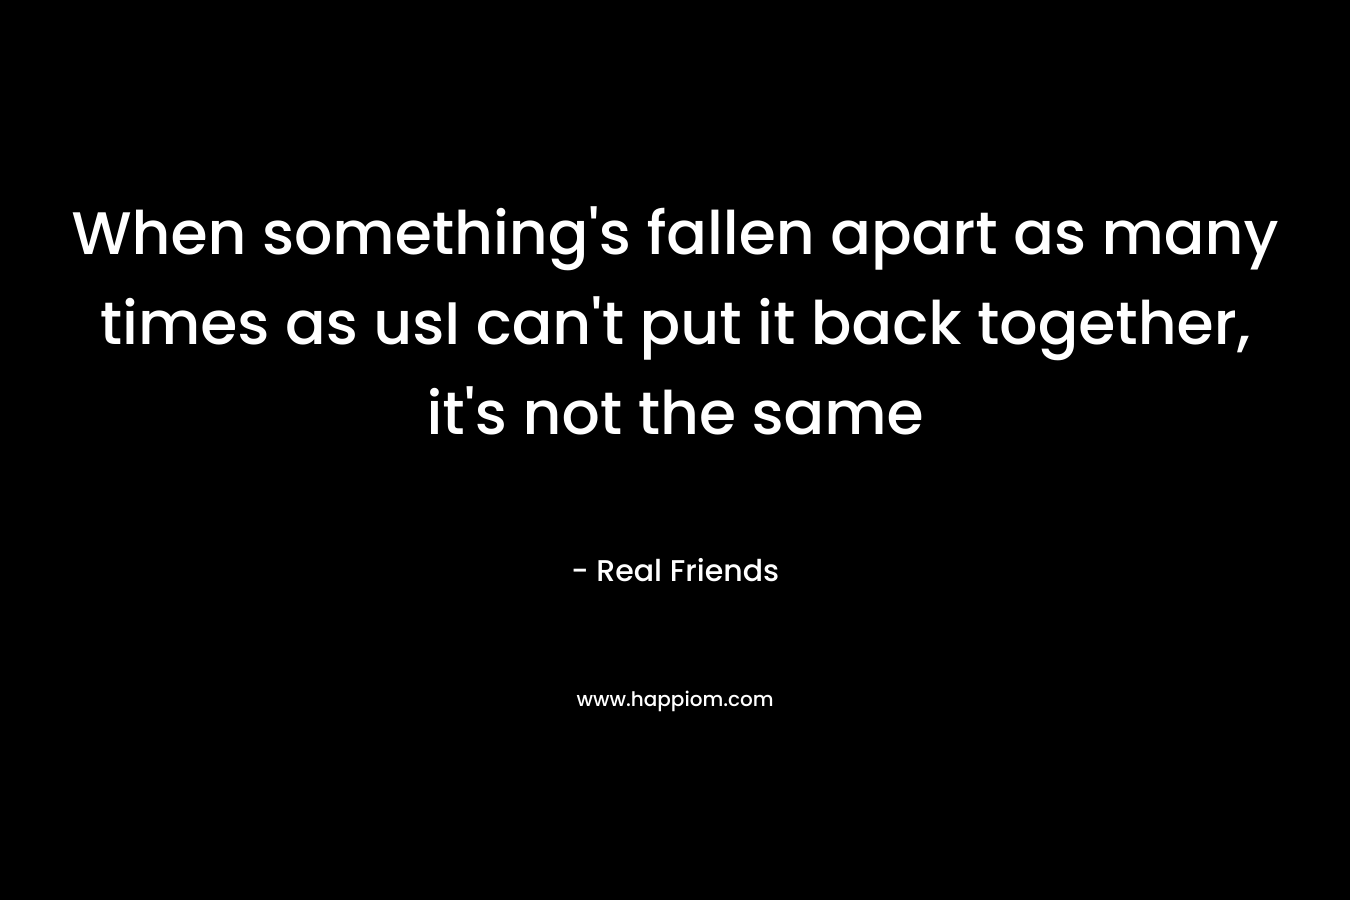 When something’s fallen apart as many times as usI can’t put it back together, it’s not the same – Real Friends